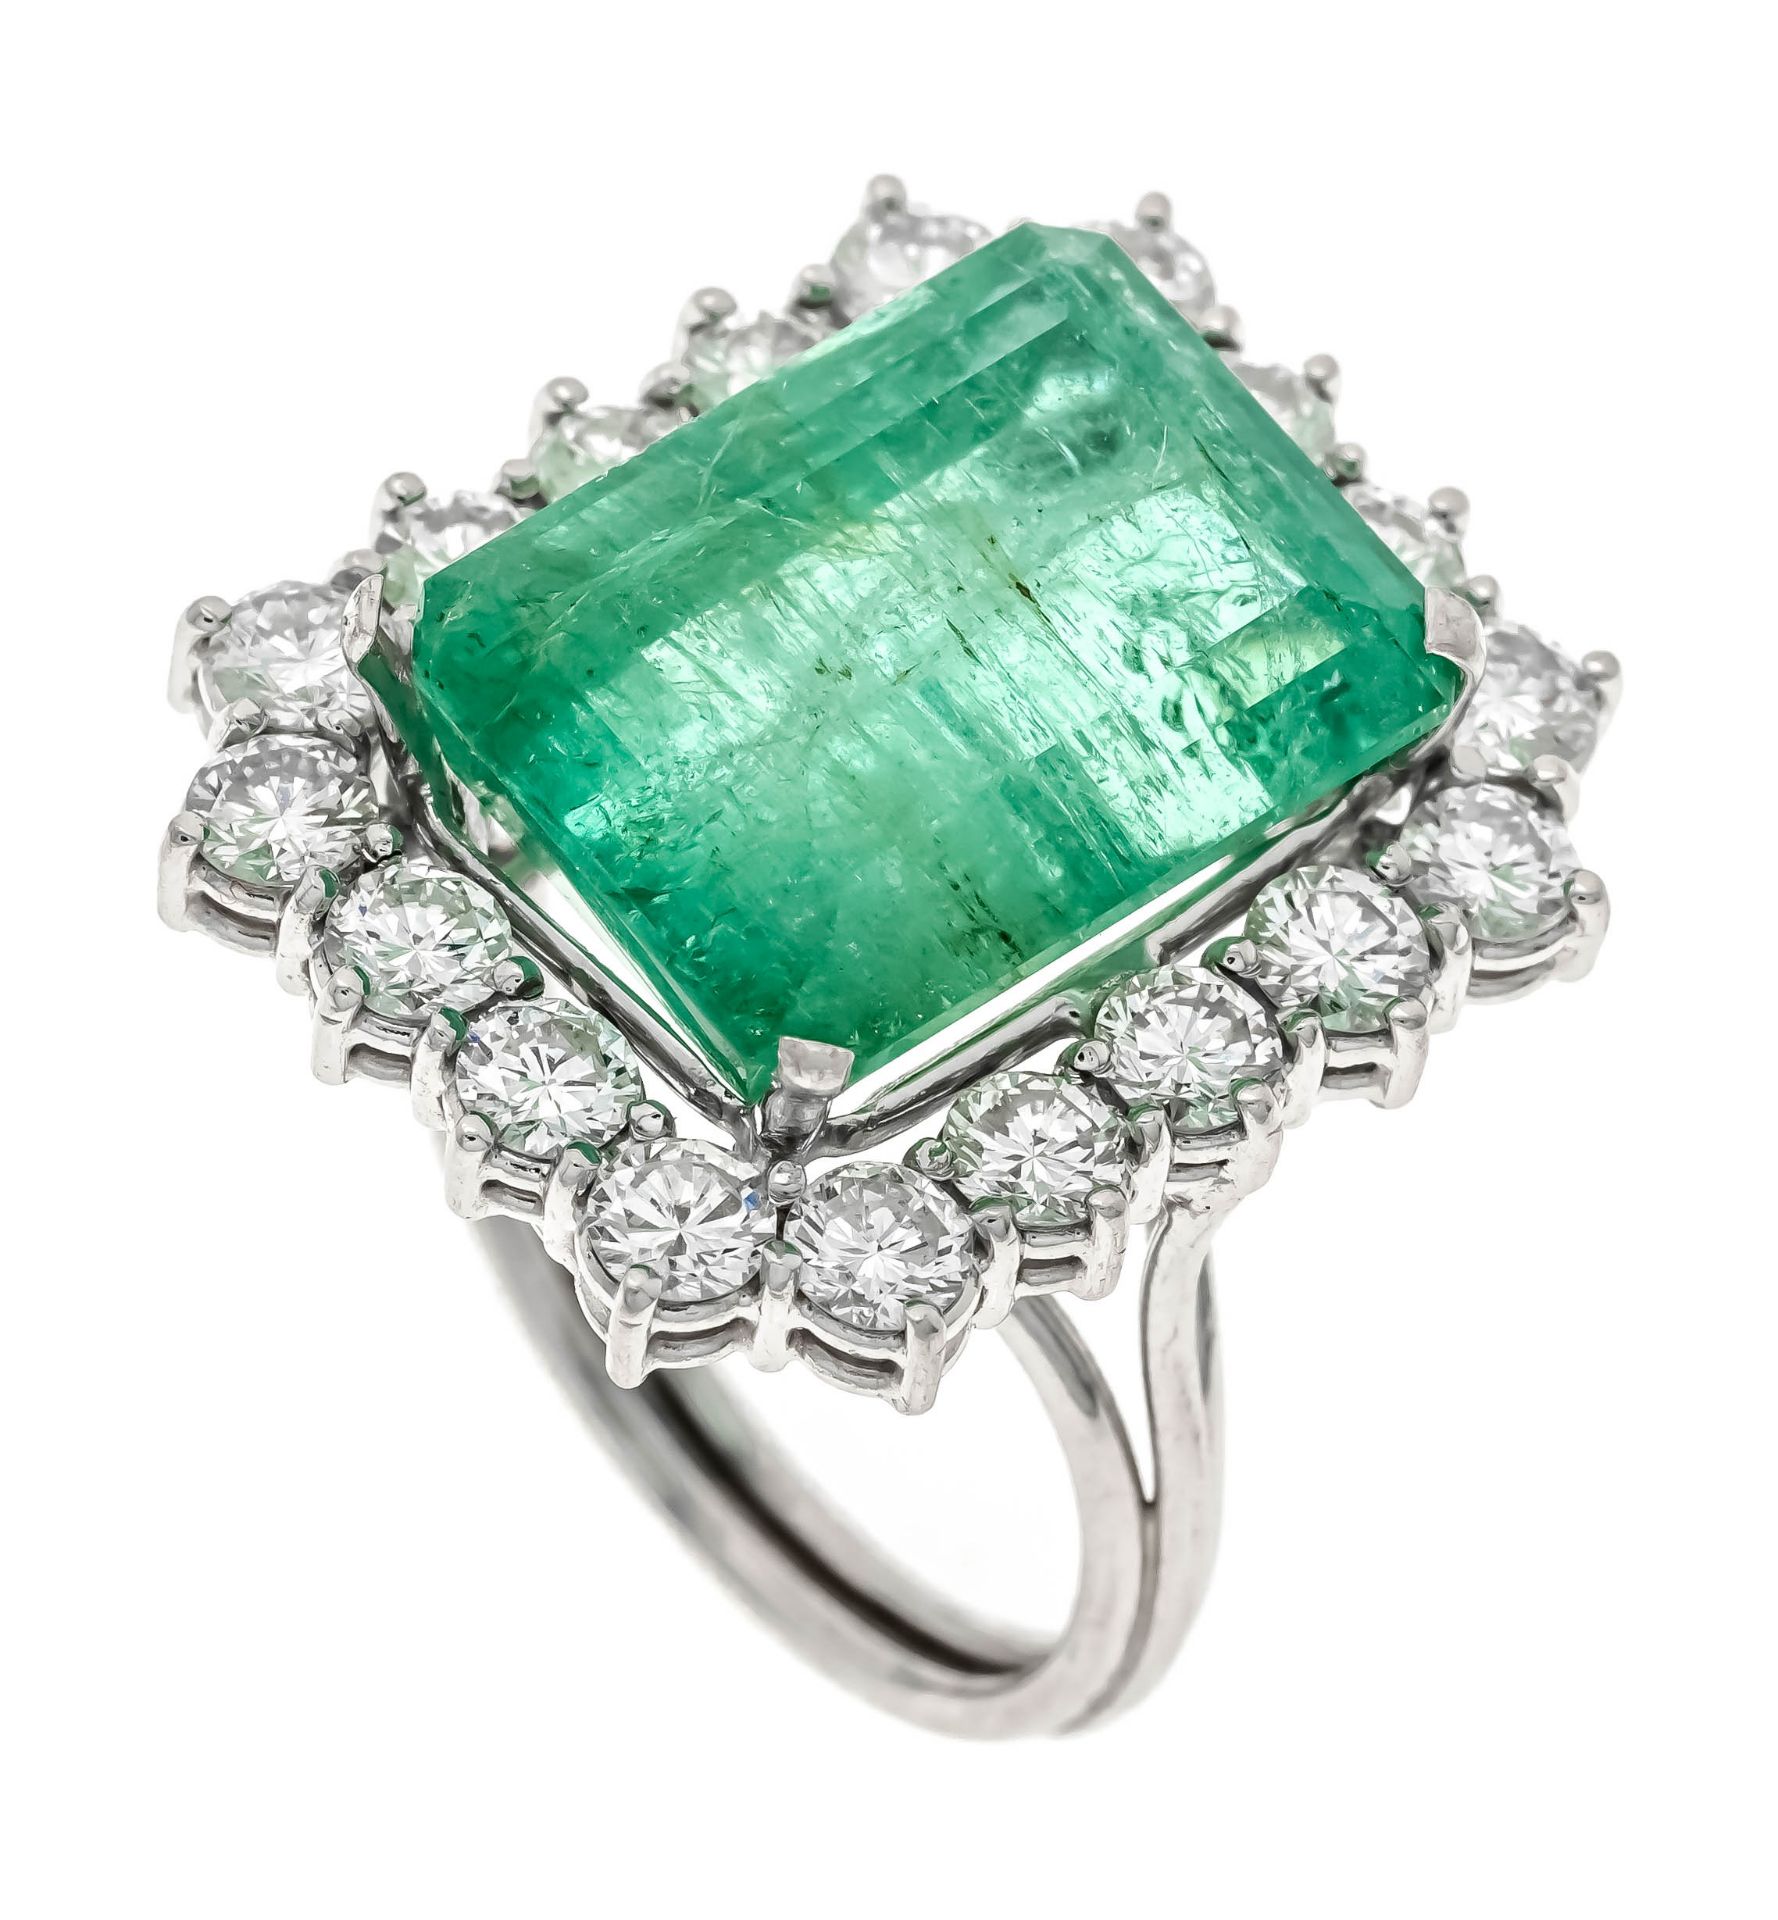 Emerald diamond ring WG 750/000 unstamped, tested, with an emerald cut faceted emerald 15,5 x 11,7 x